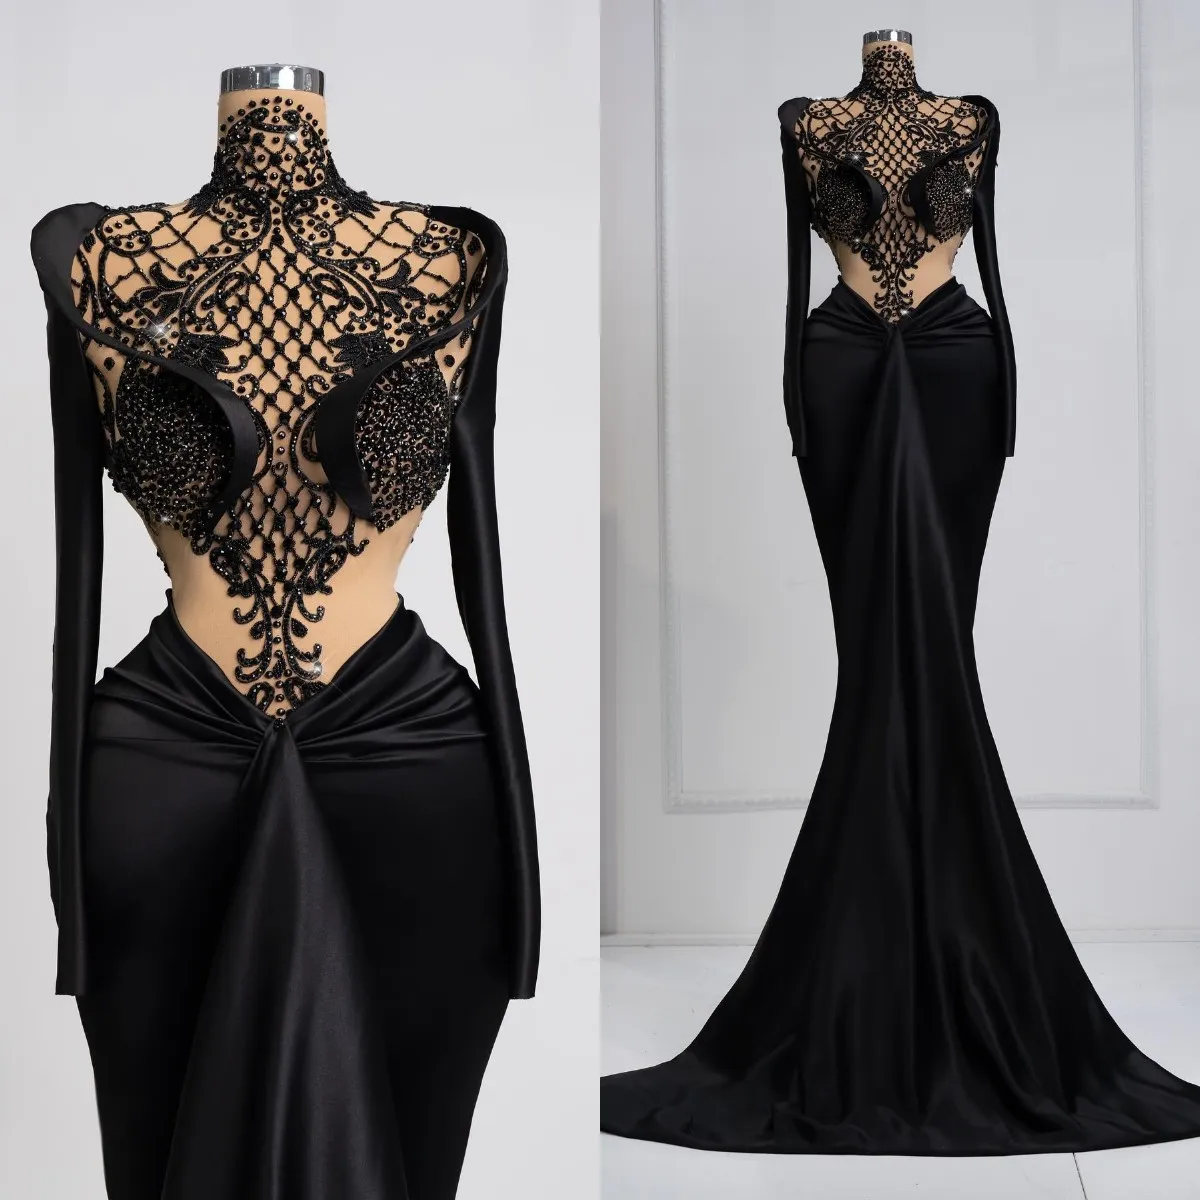 Black Beaded Modest Prom Dresses Satin High Neck Lace Sweep Train Custom Made Evening Party Gown Plus Size Formal 0425